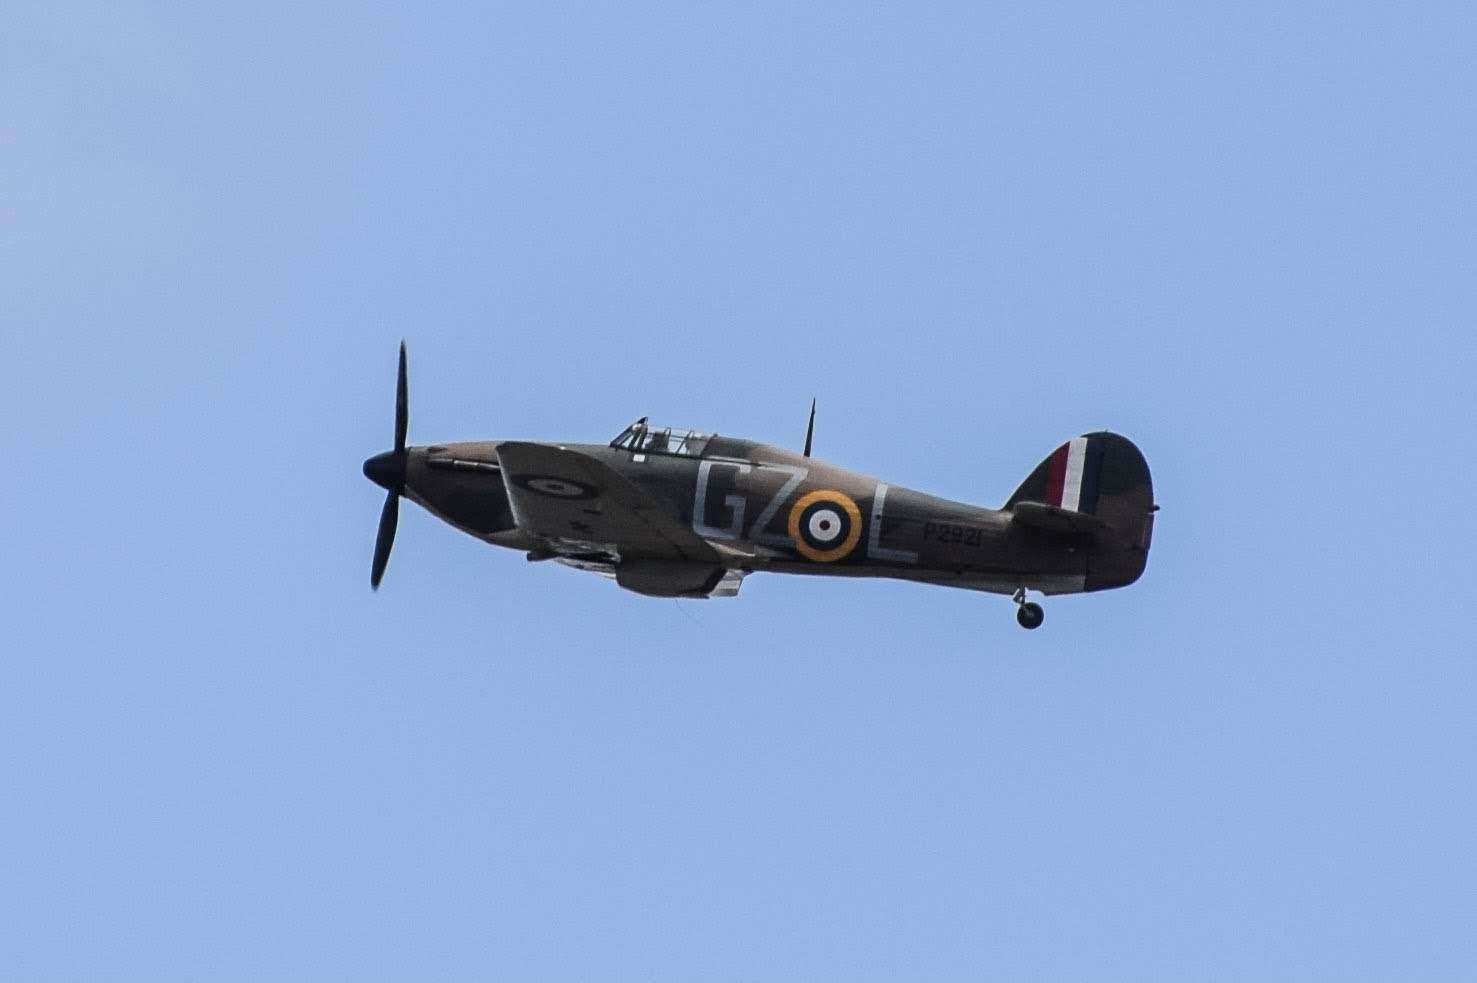 War & Peace Revival also takes to the skies